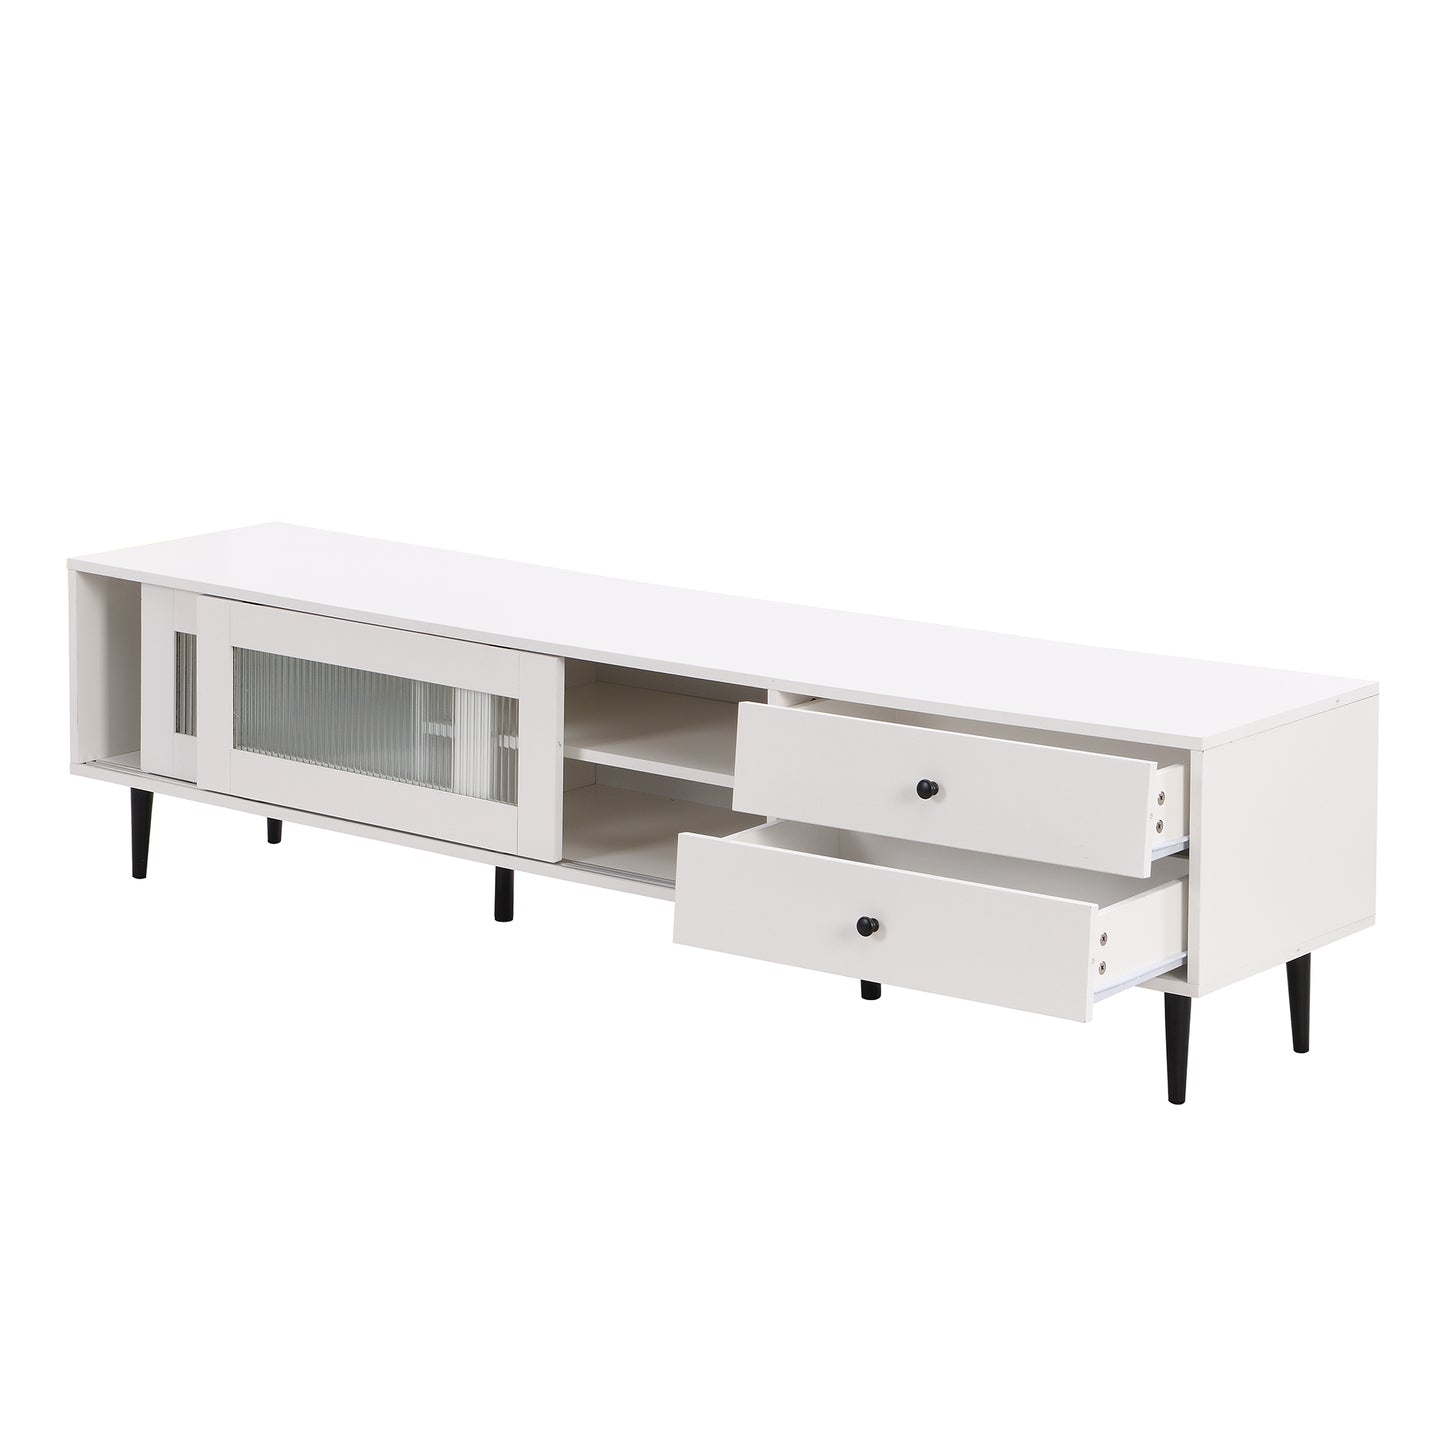 Chic Elegant Design TV Stand with Sliding Fluted Glass Doors